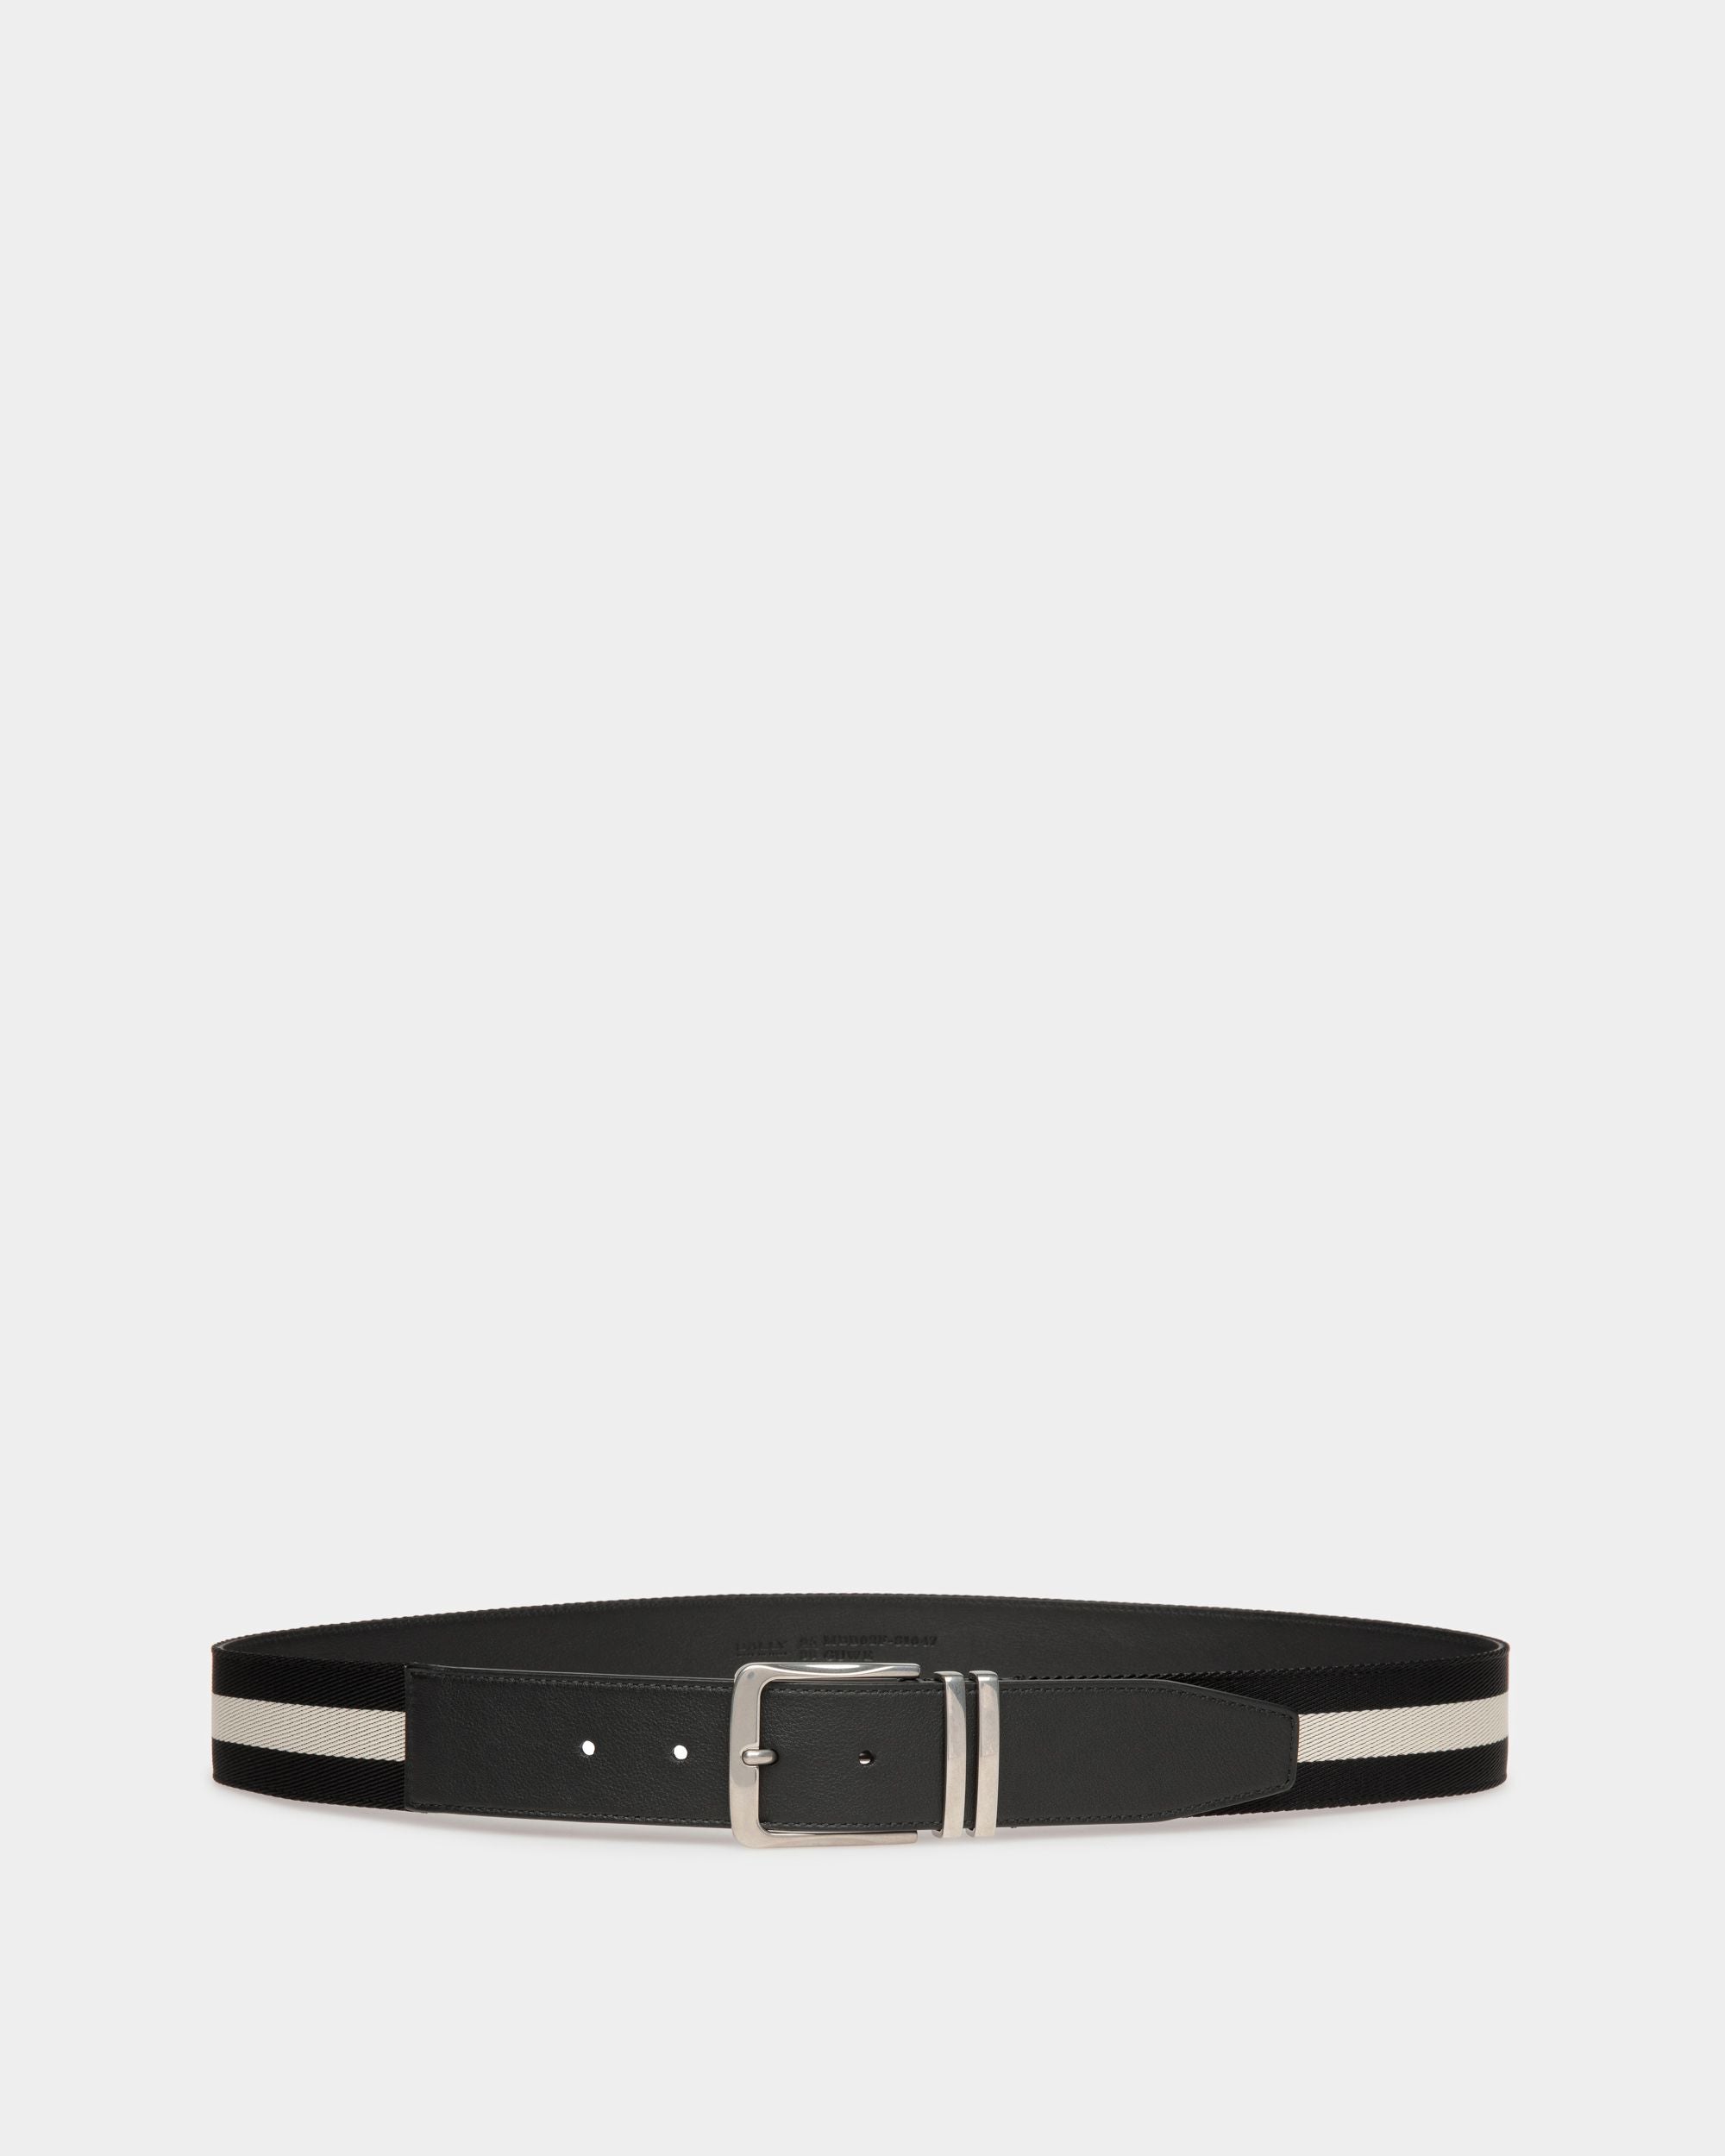 Curved | Men's Belt | Black Fabric And Leather | Bally | Still Life Front